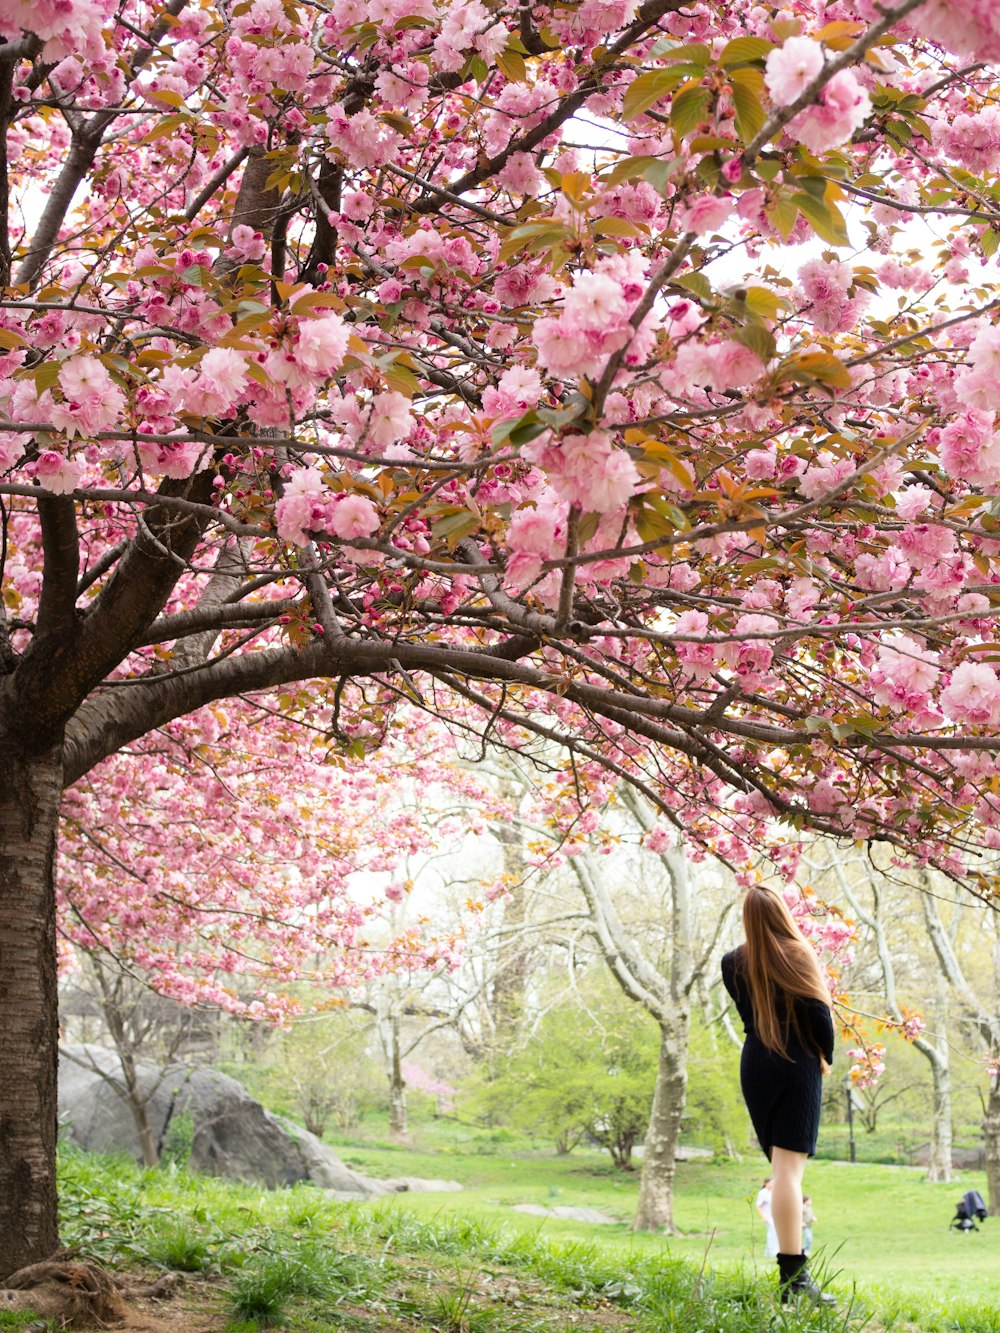 a person standing under a tree with pink flowers